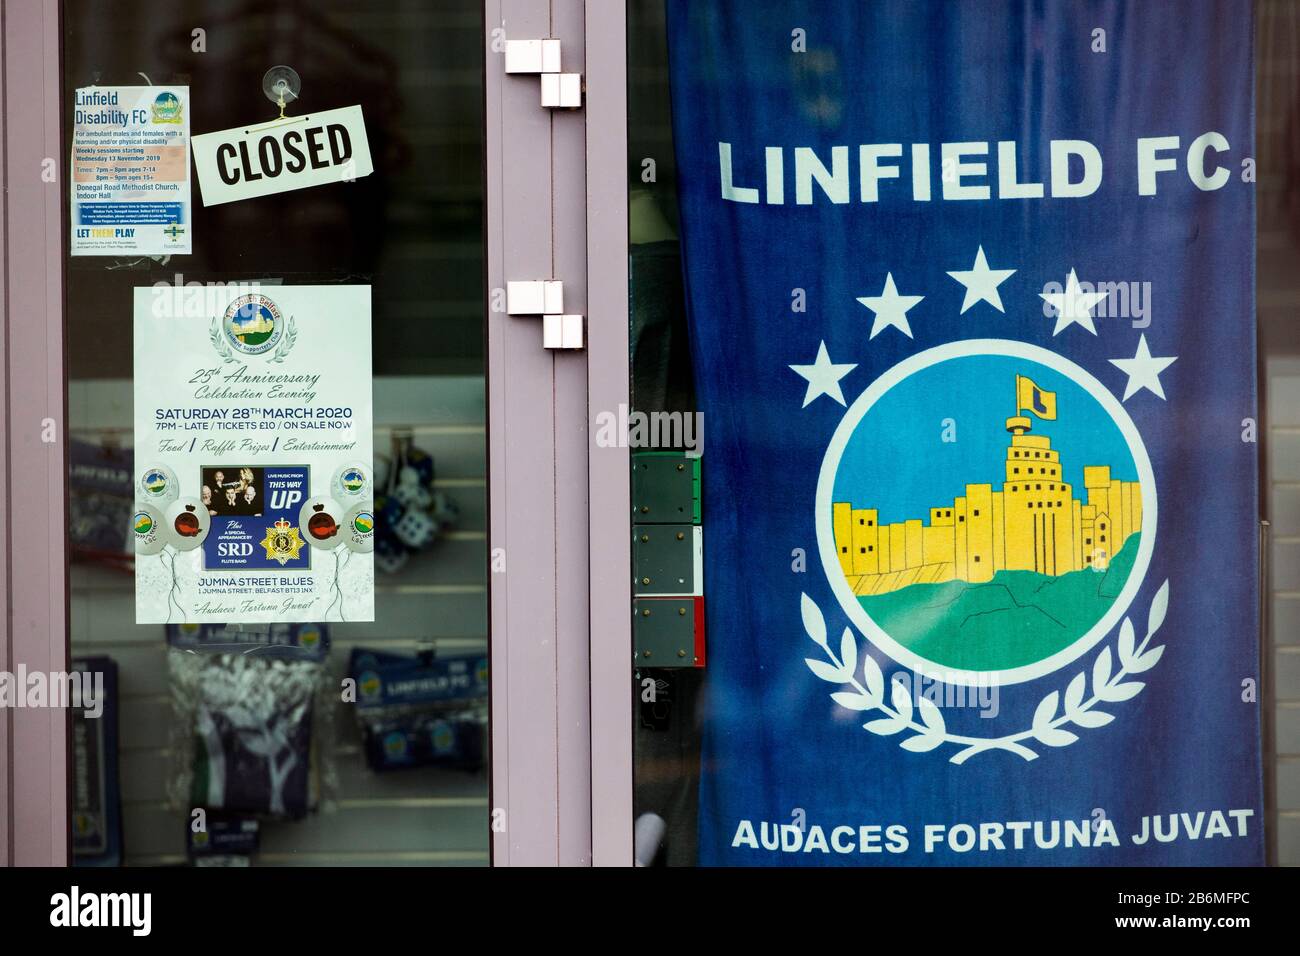 The closed Linfield FC superstore at the National Football Stadium at Windsor Park in Belfast. The stadium, which is the home of Linfield FC and Northern Ireland's national football team, has closed its offices and superstore for a deep clean after a Linfield player contracted Coronavirus. Stock Photo